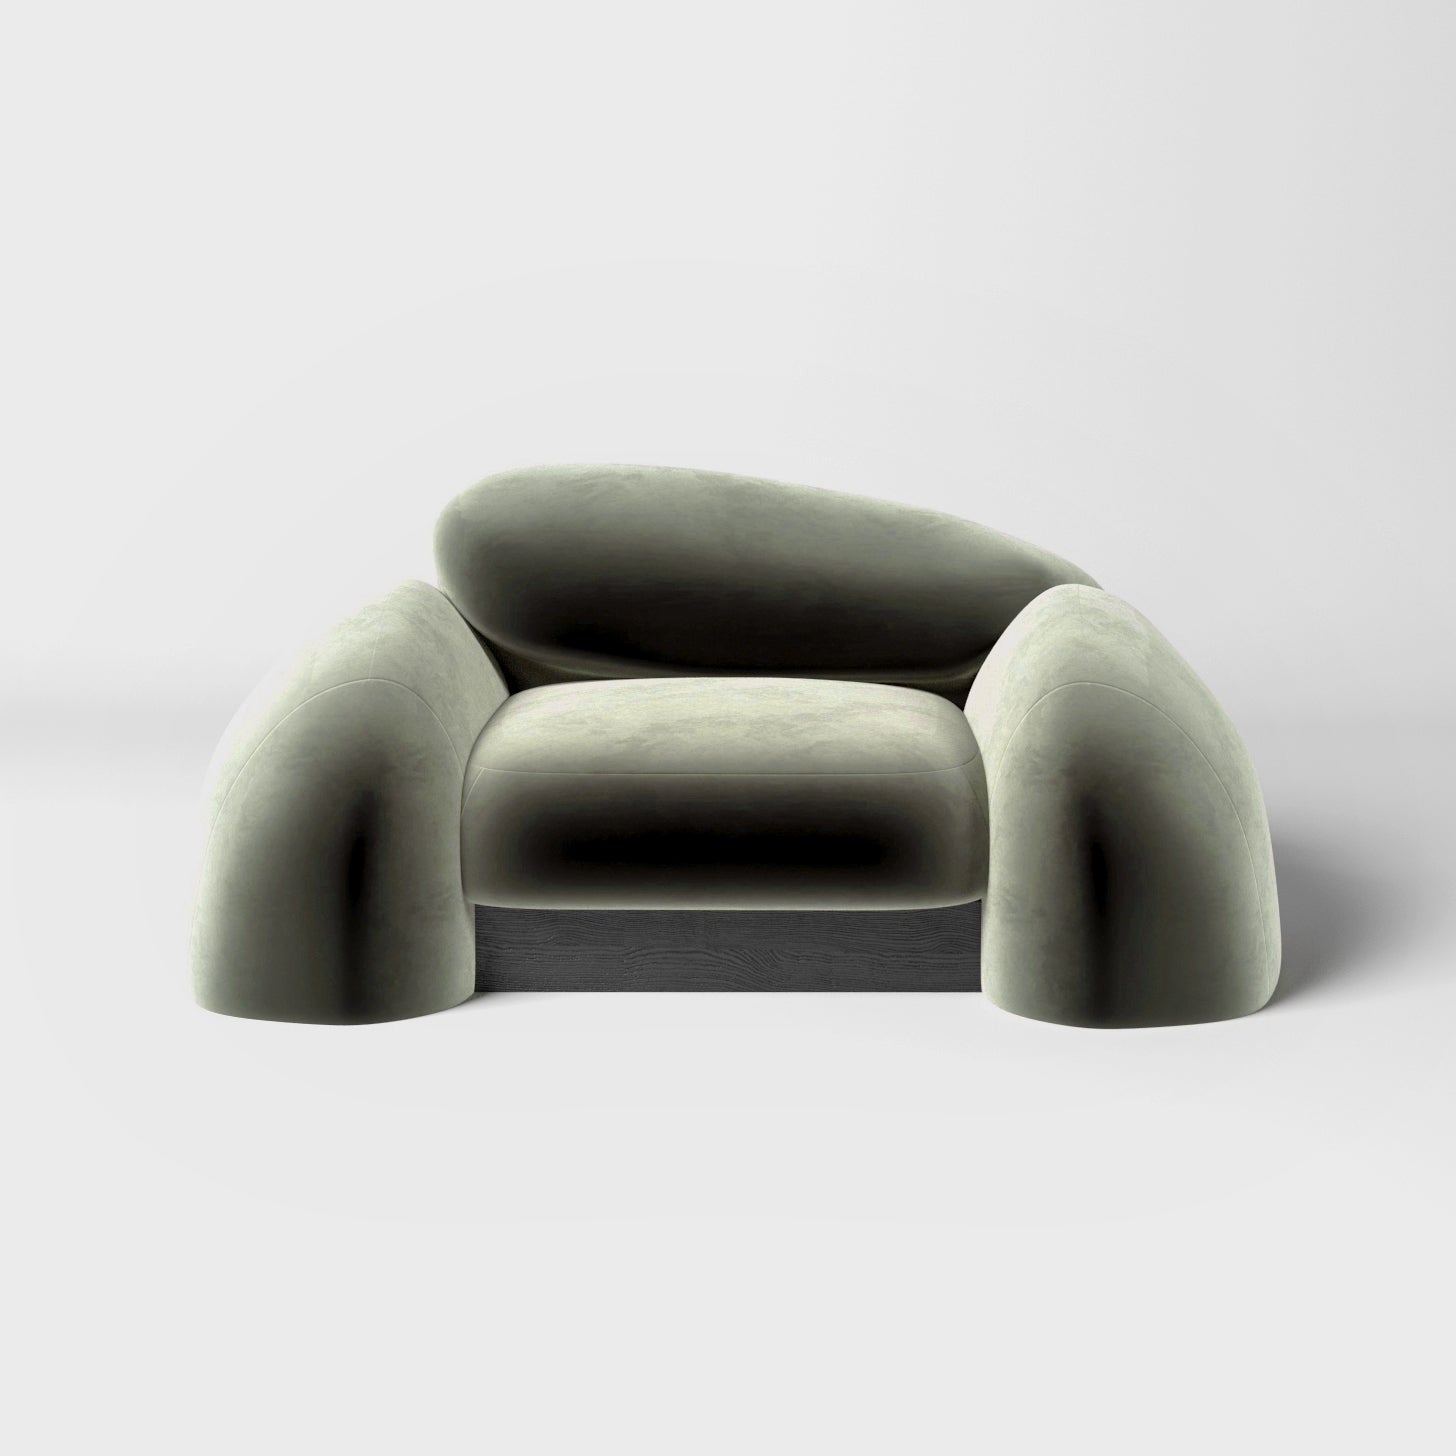 products/Plyn_armchair.jpg